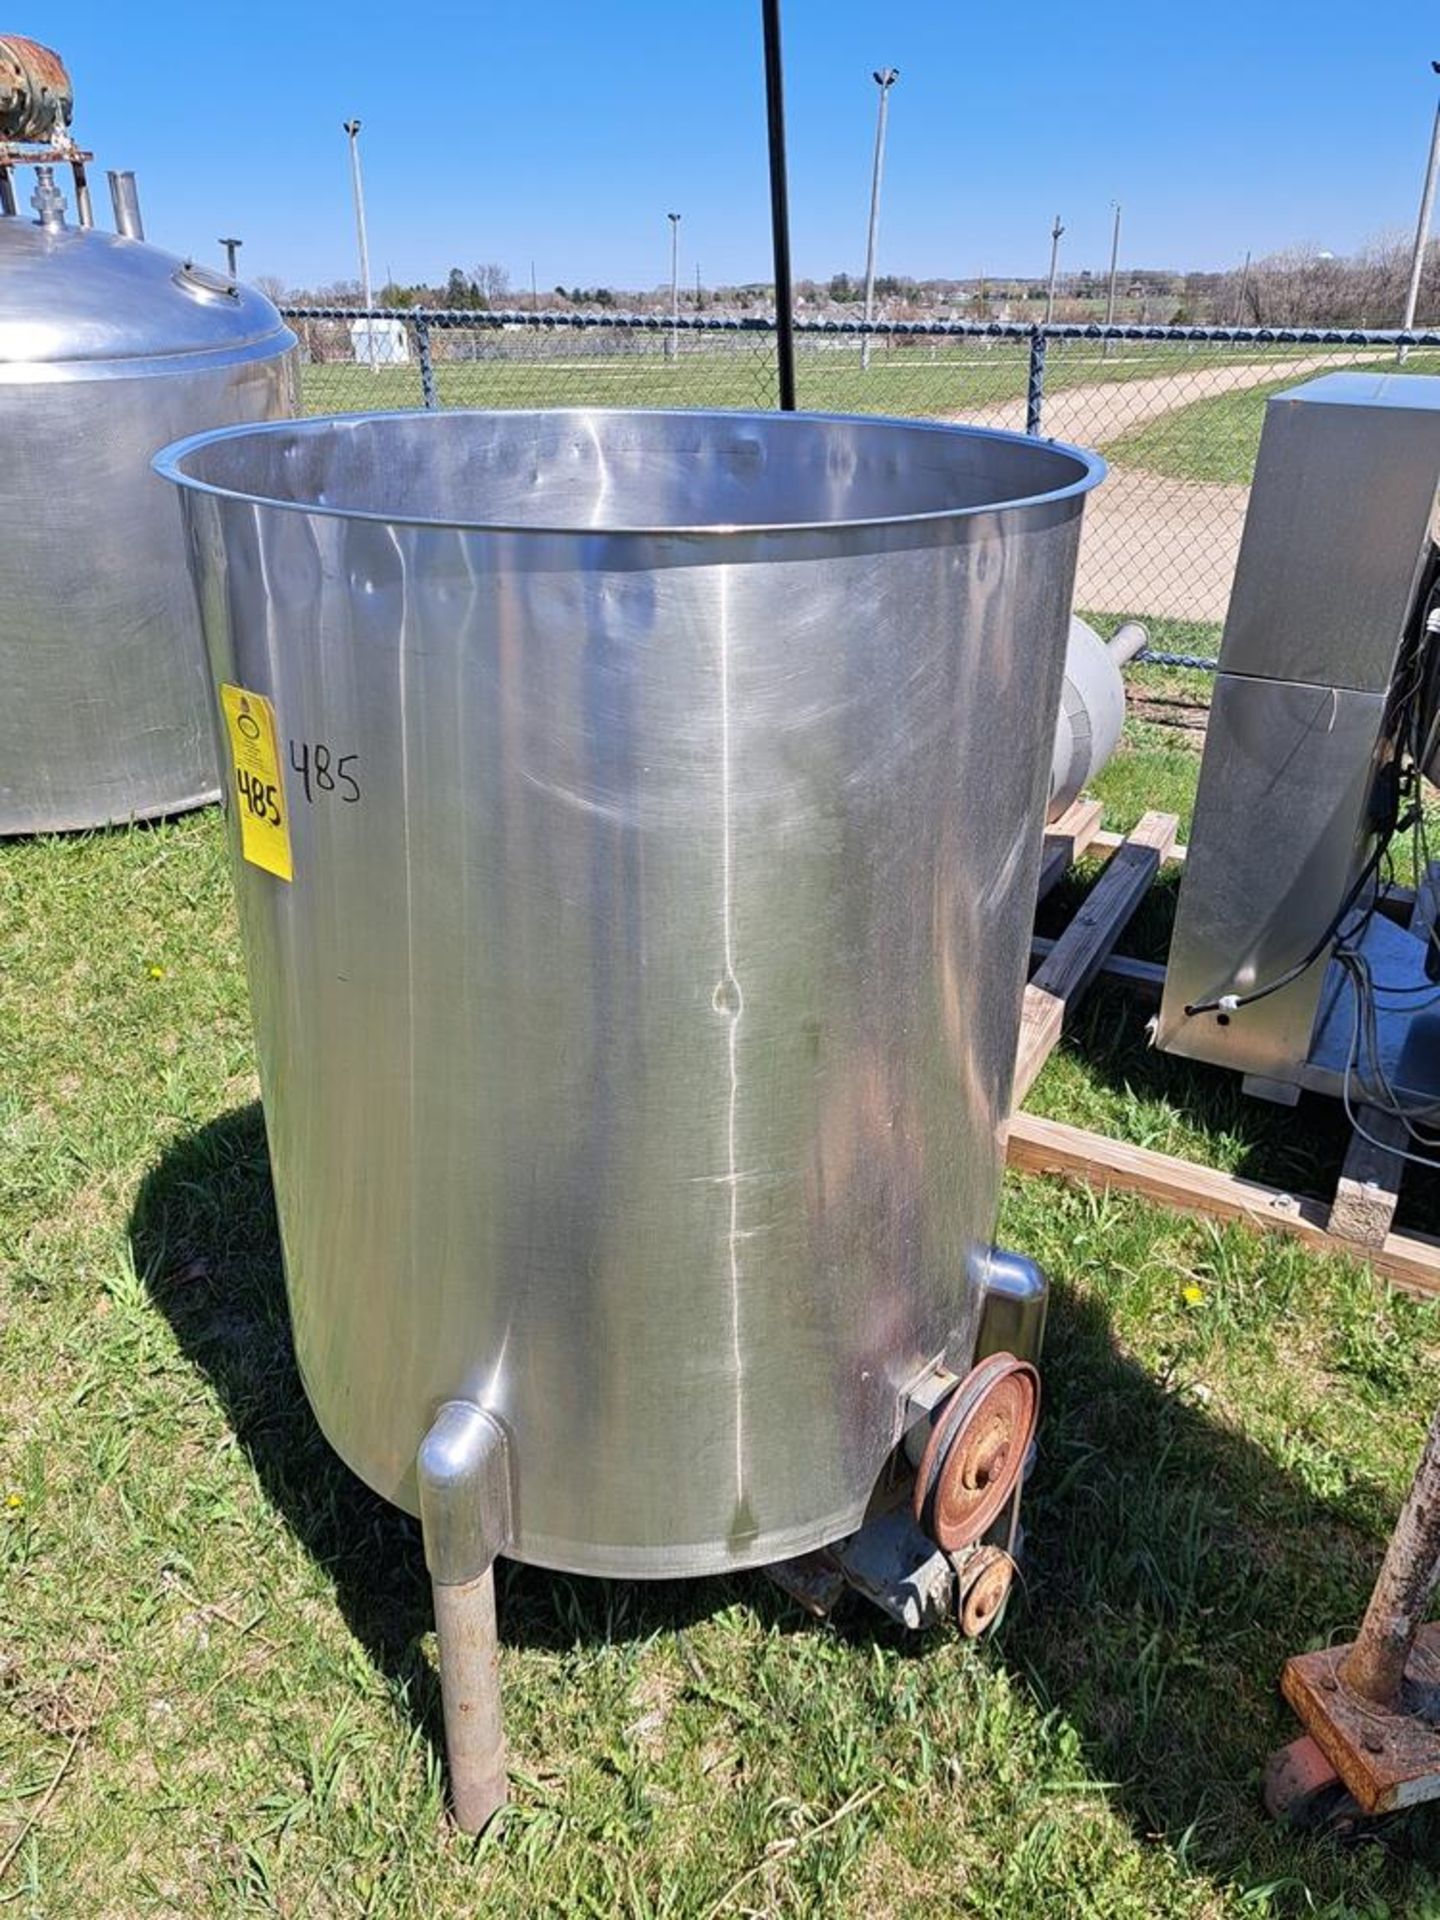 Stainless Steel Single Wall Tank, 34" diameter X 40" deep, 56" tall overall (Required Loading